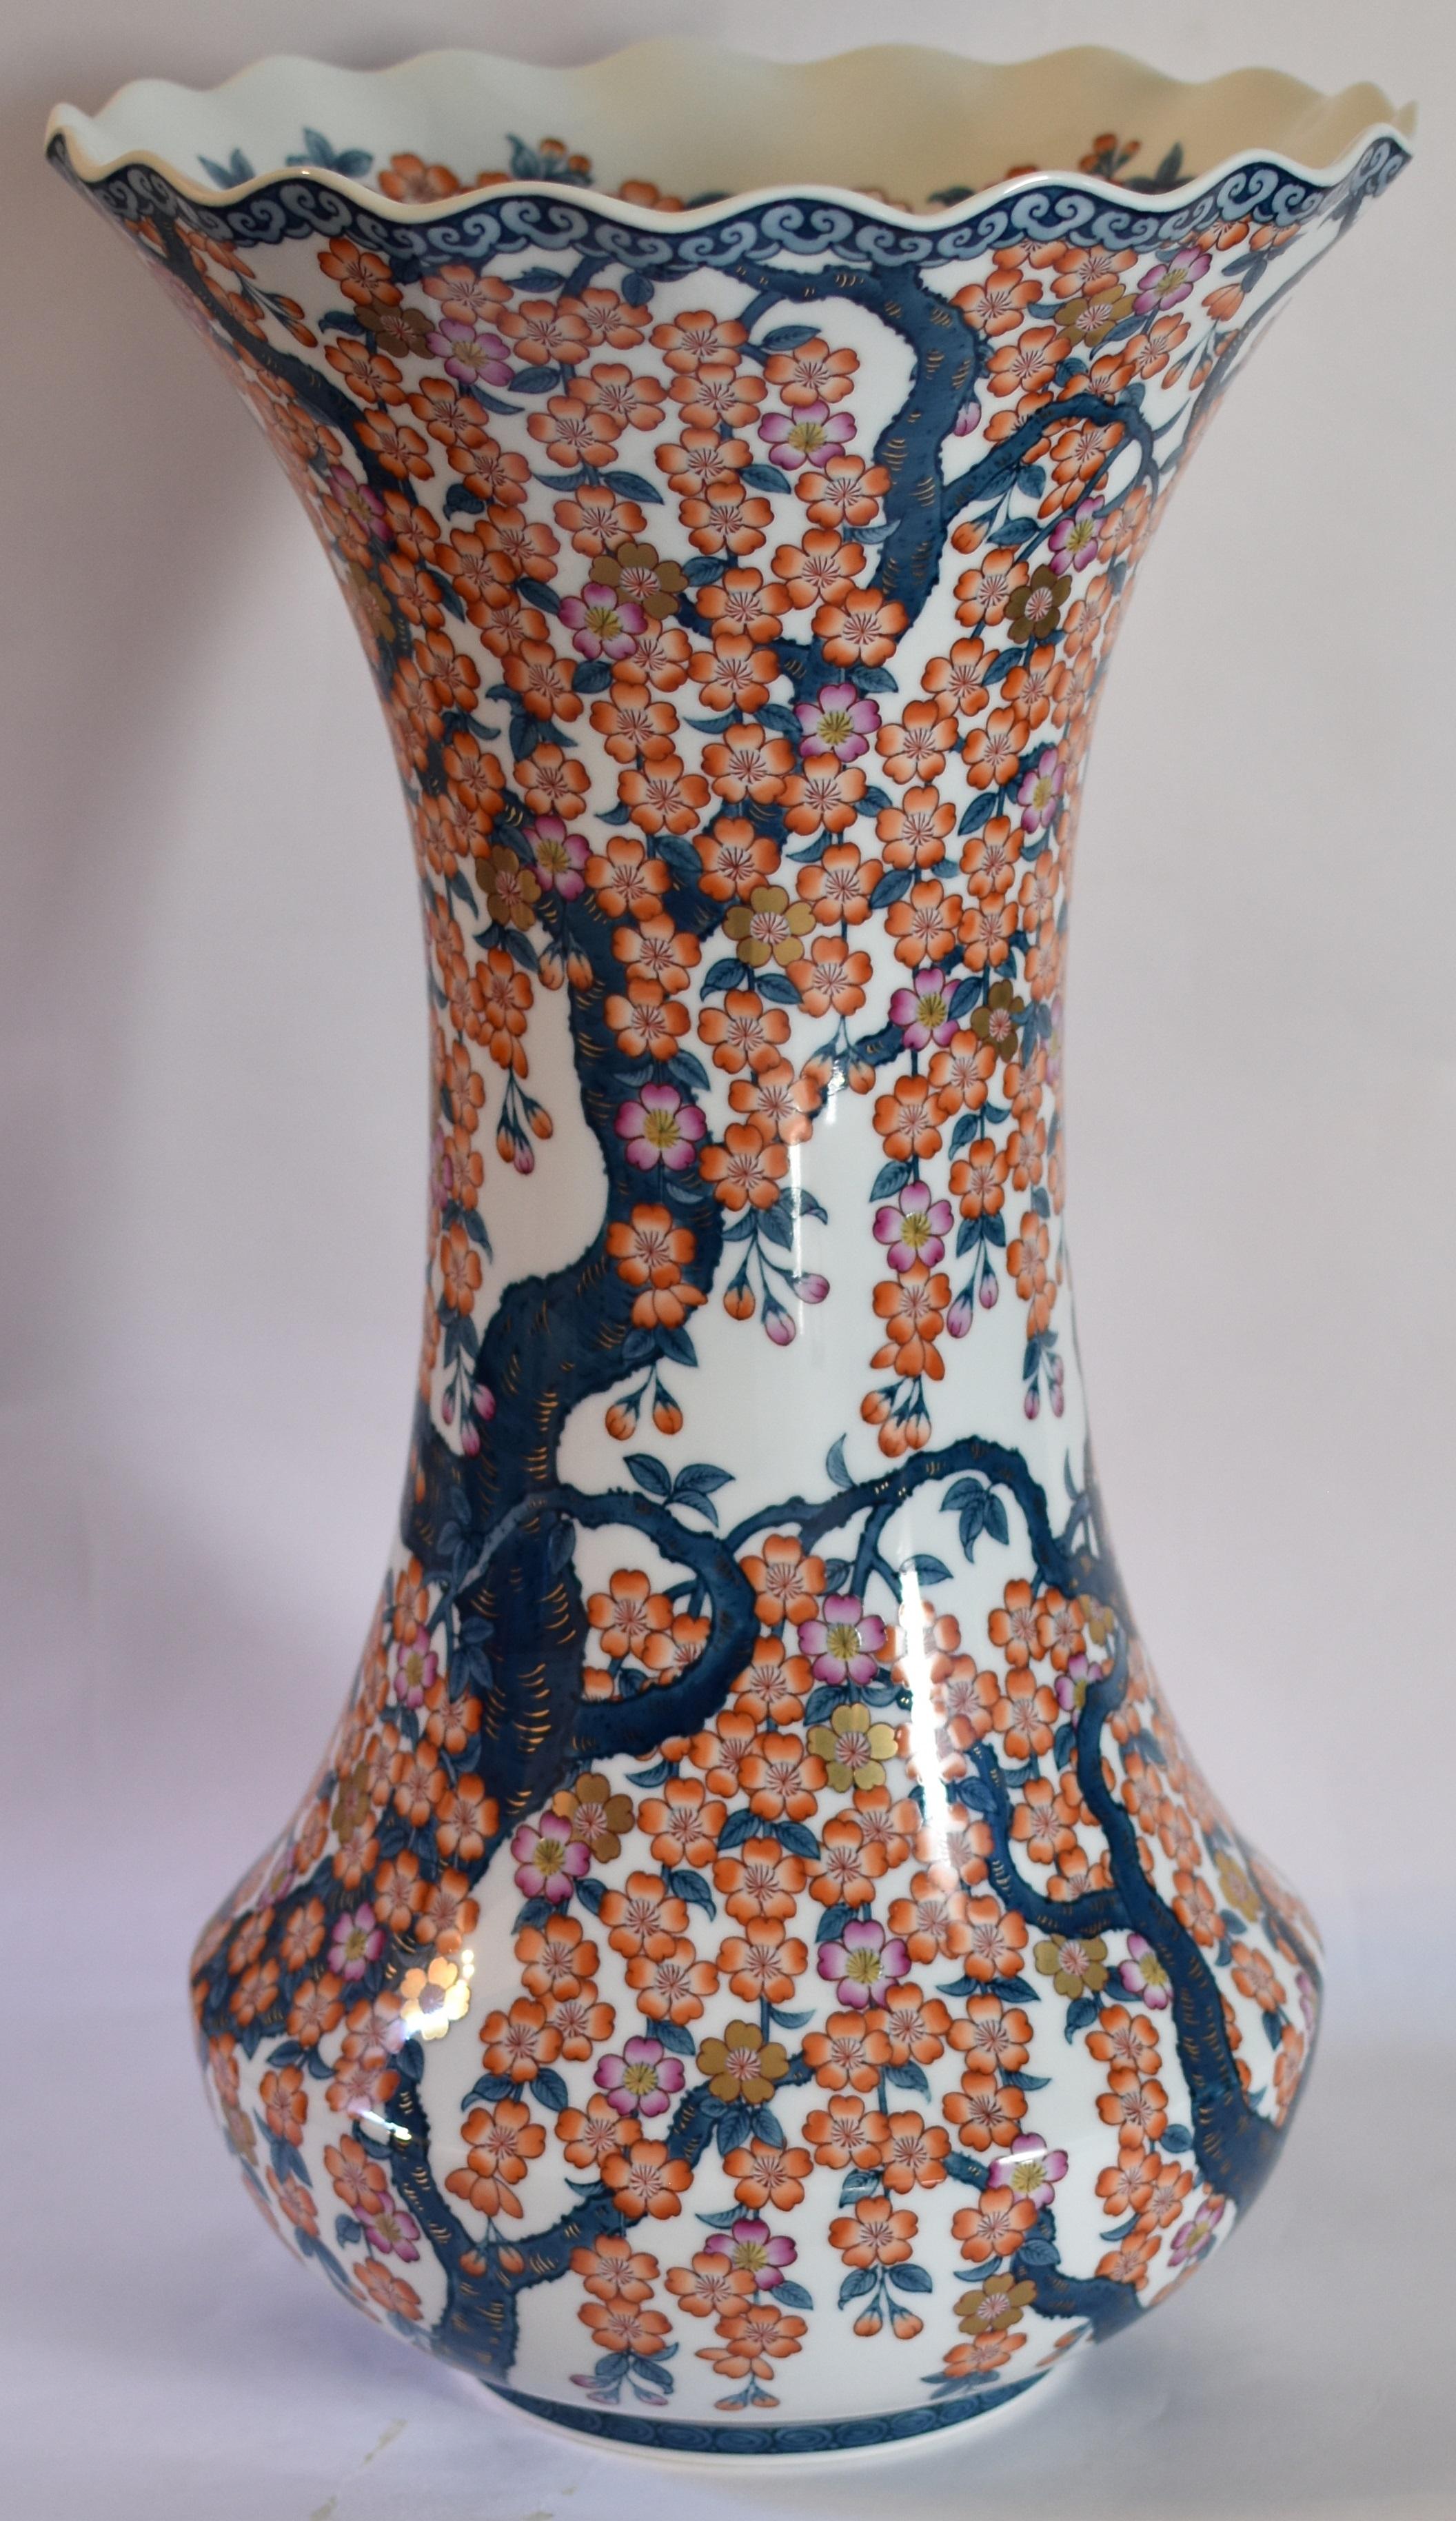 Massive contemporary Japanese porcelain vase, hand-painted on a very large unique porcelain body with an astonishingly beautiful shape and flared top, is a signed masterpiece by highly acclaimed award-winning Japanese master porcelain artist of the